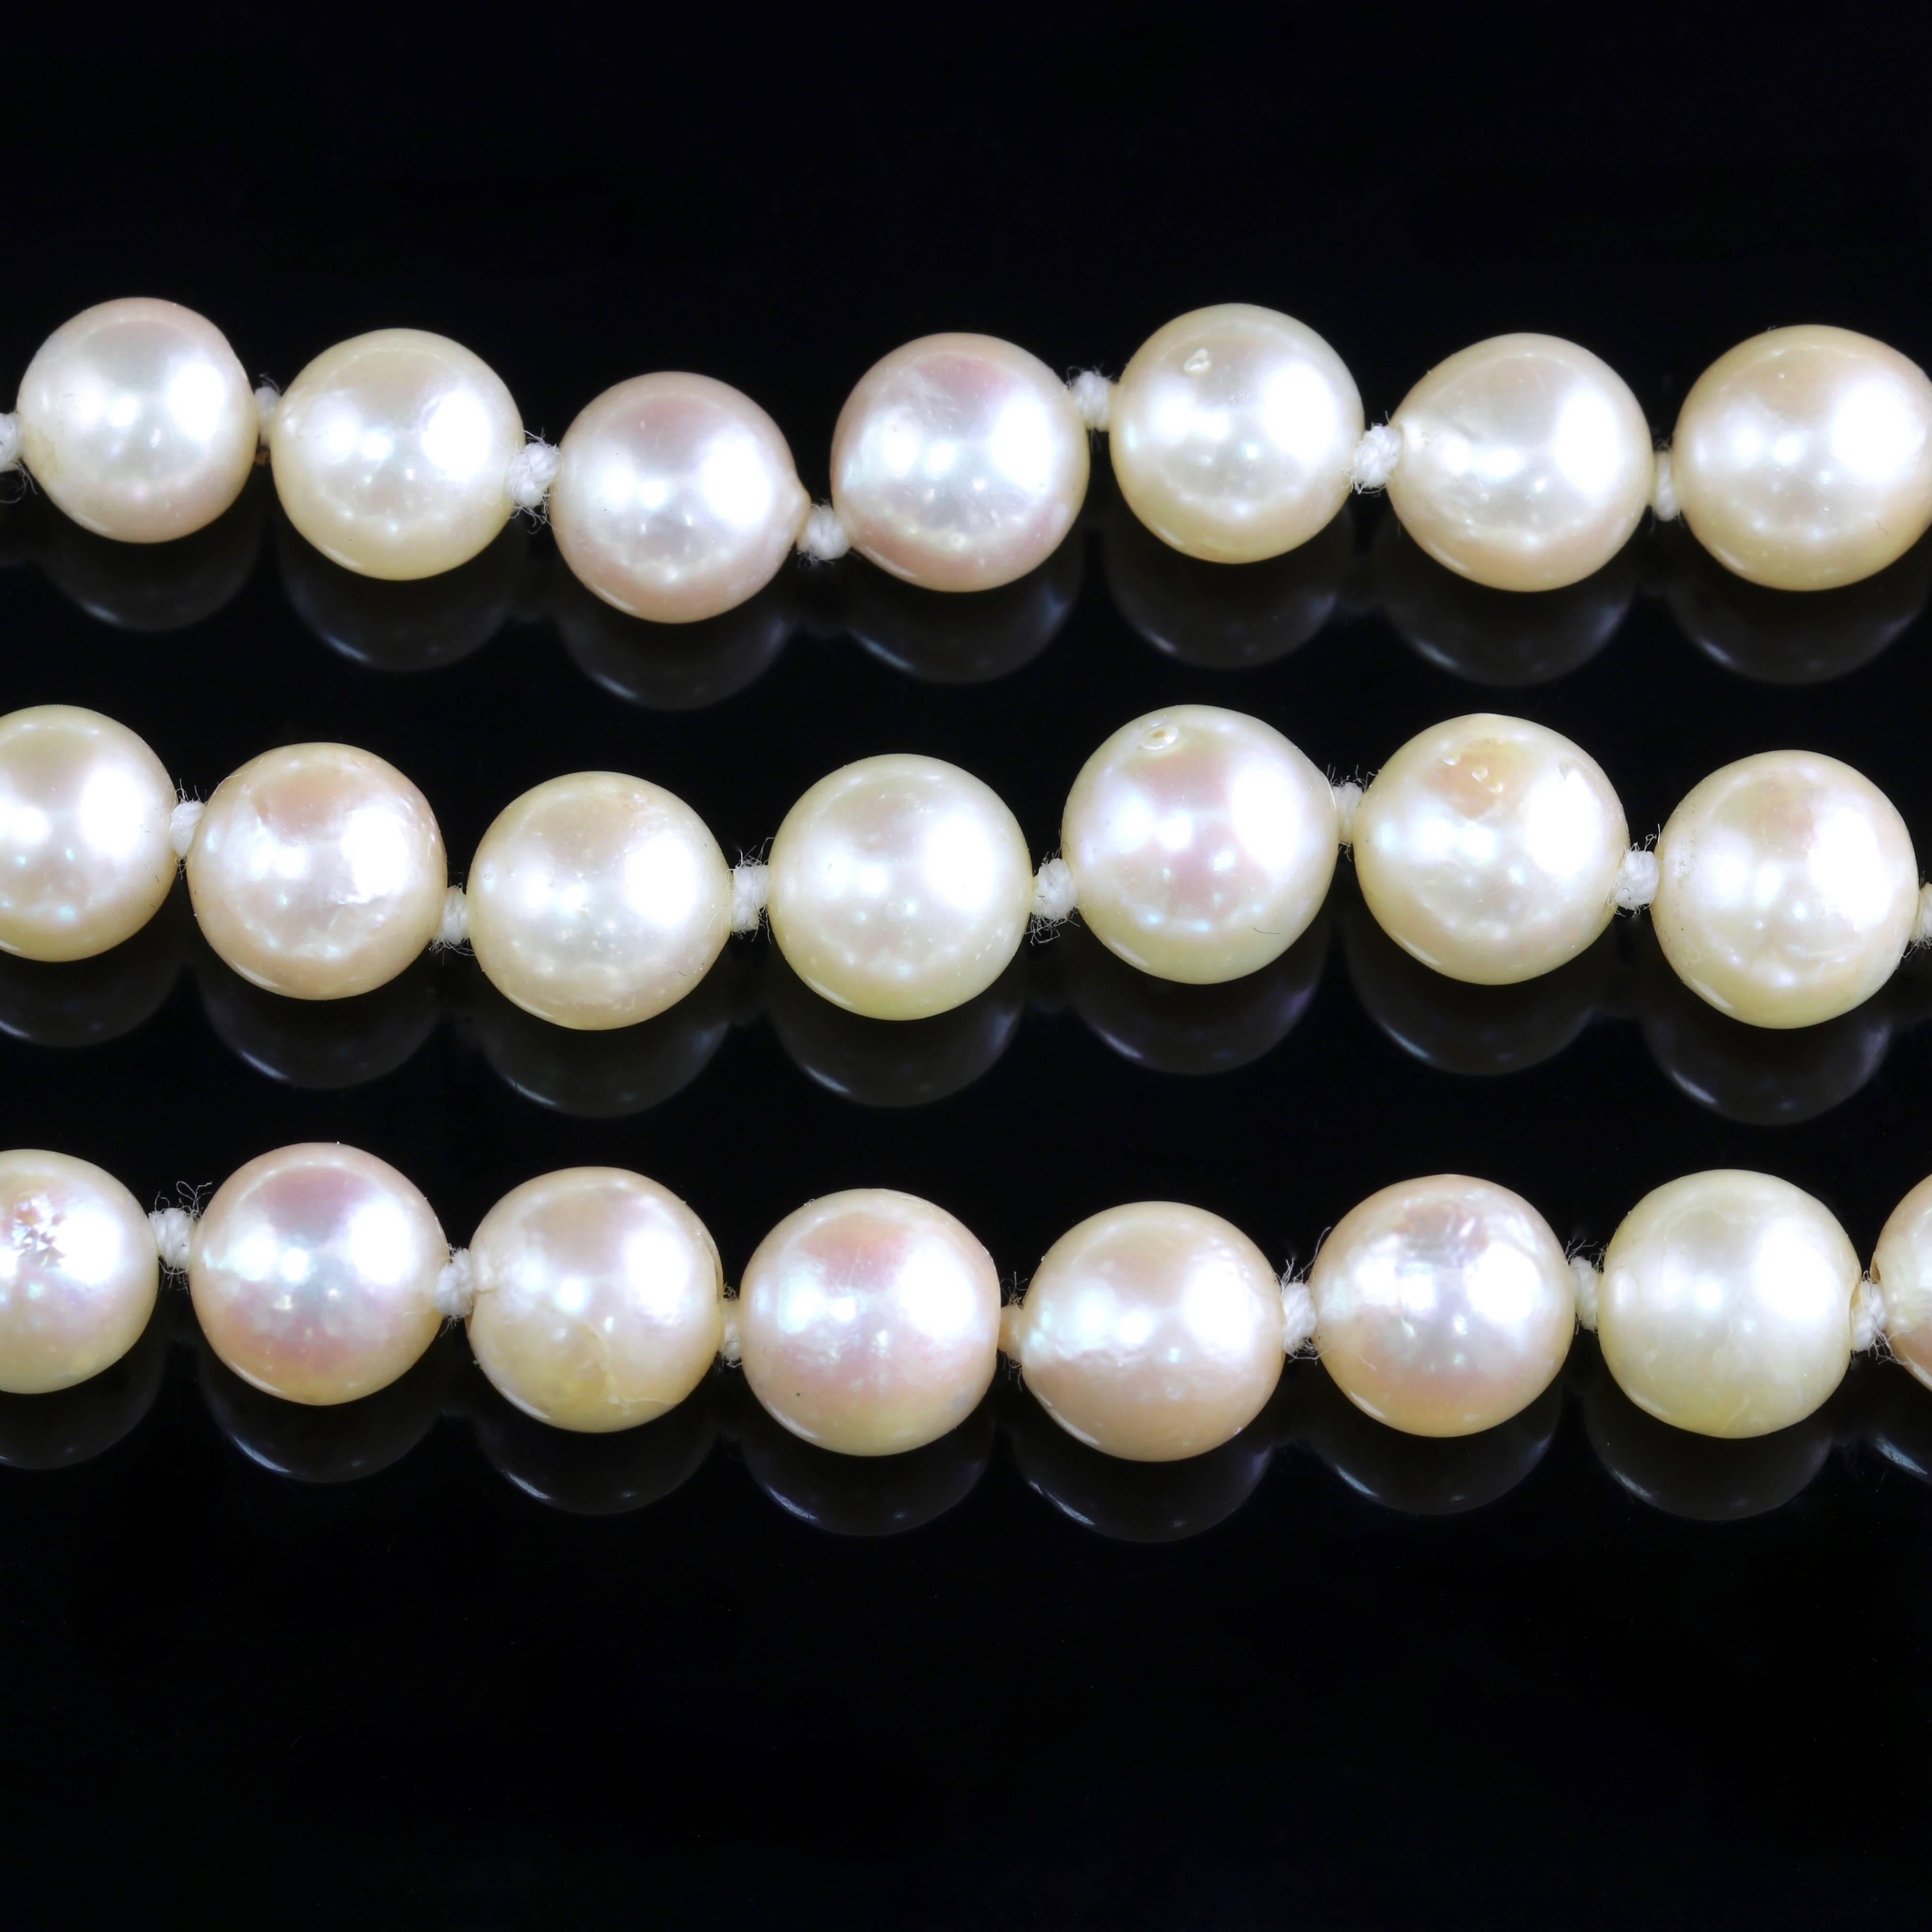 To read more please click continue reading below-

This fabulous Edwardian triple row Pearl necklace is genuine Edwardian, Circa 1900.

The beautiful cultured Pearls are three graduated rows with a drop of 16 inches.

Pearls have a wonderful lustre